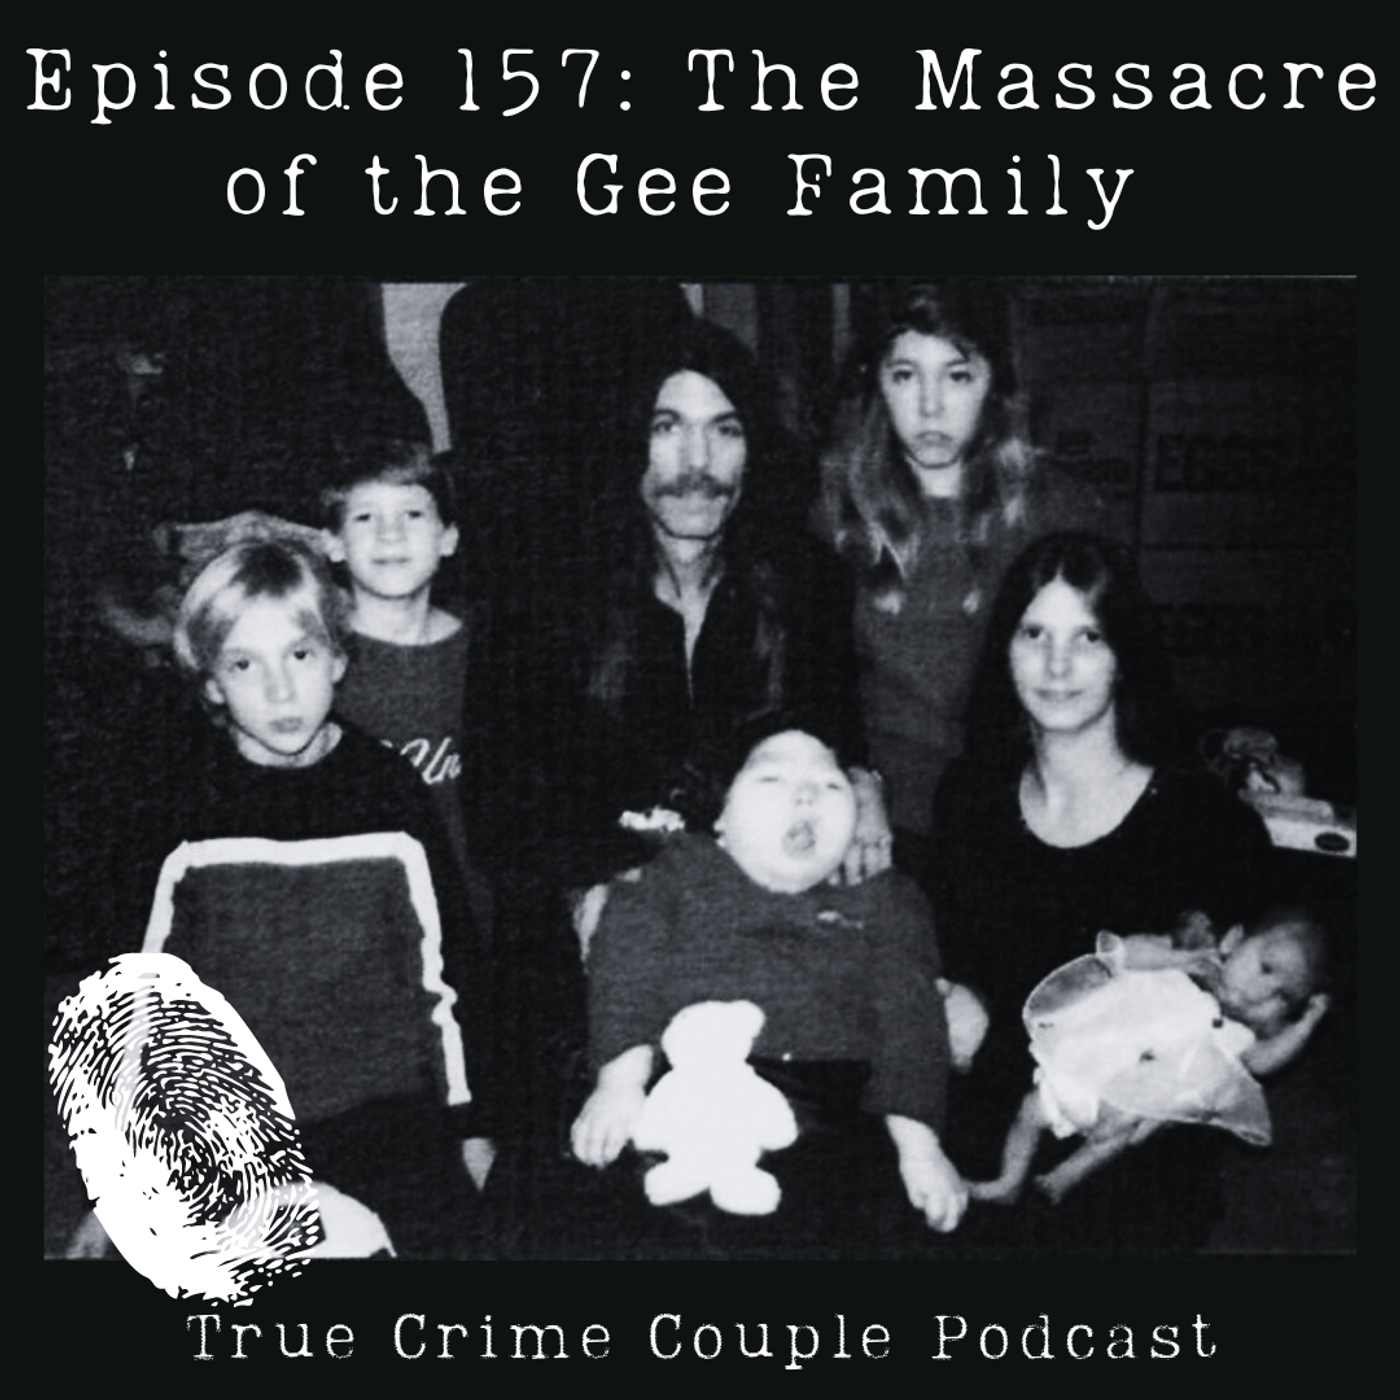 Episode 157: The Massacre of the Gee Family